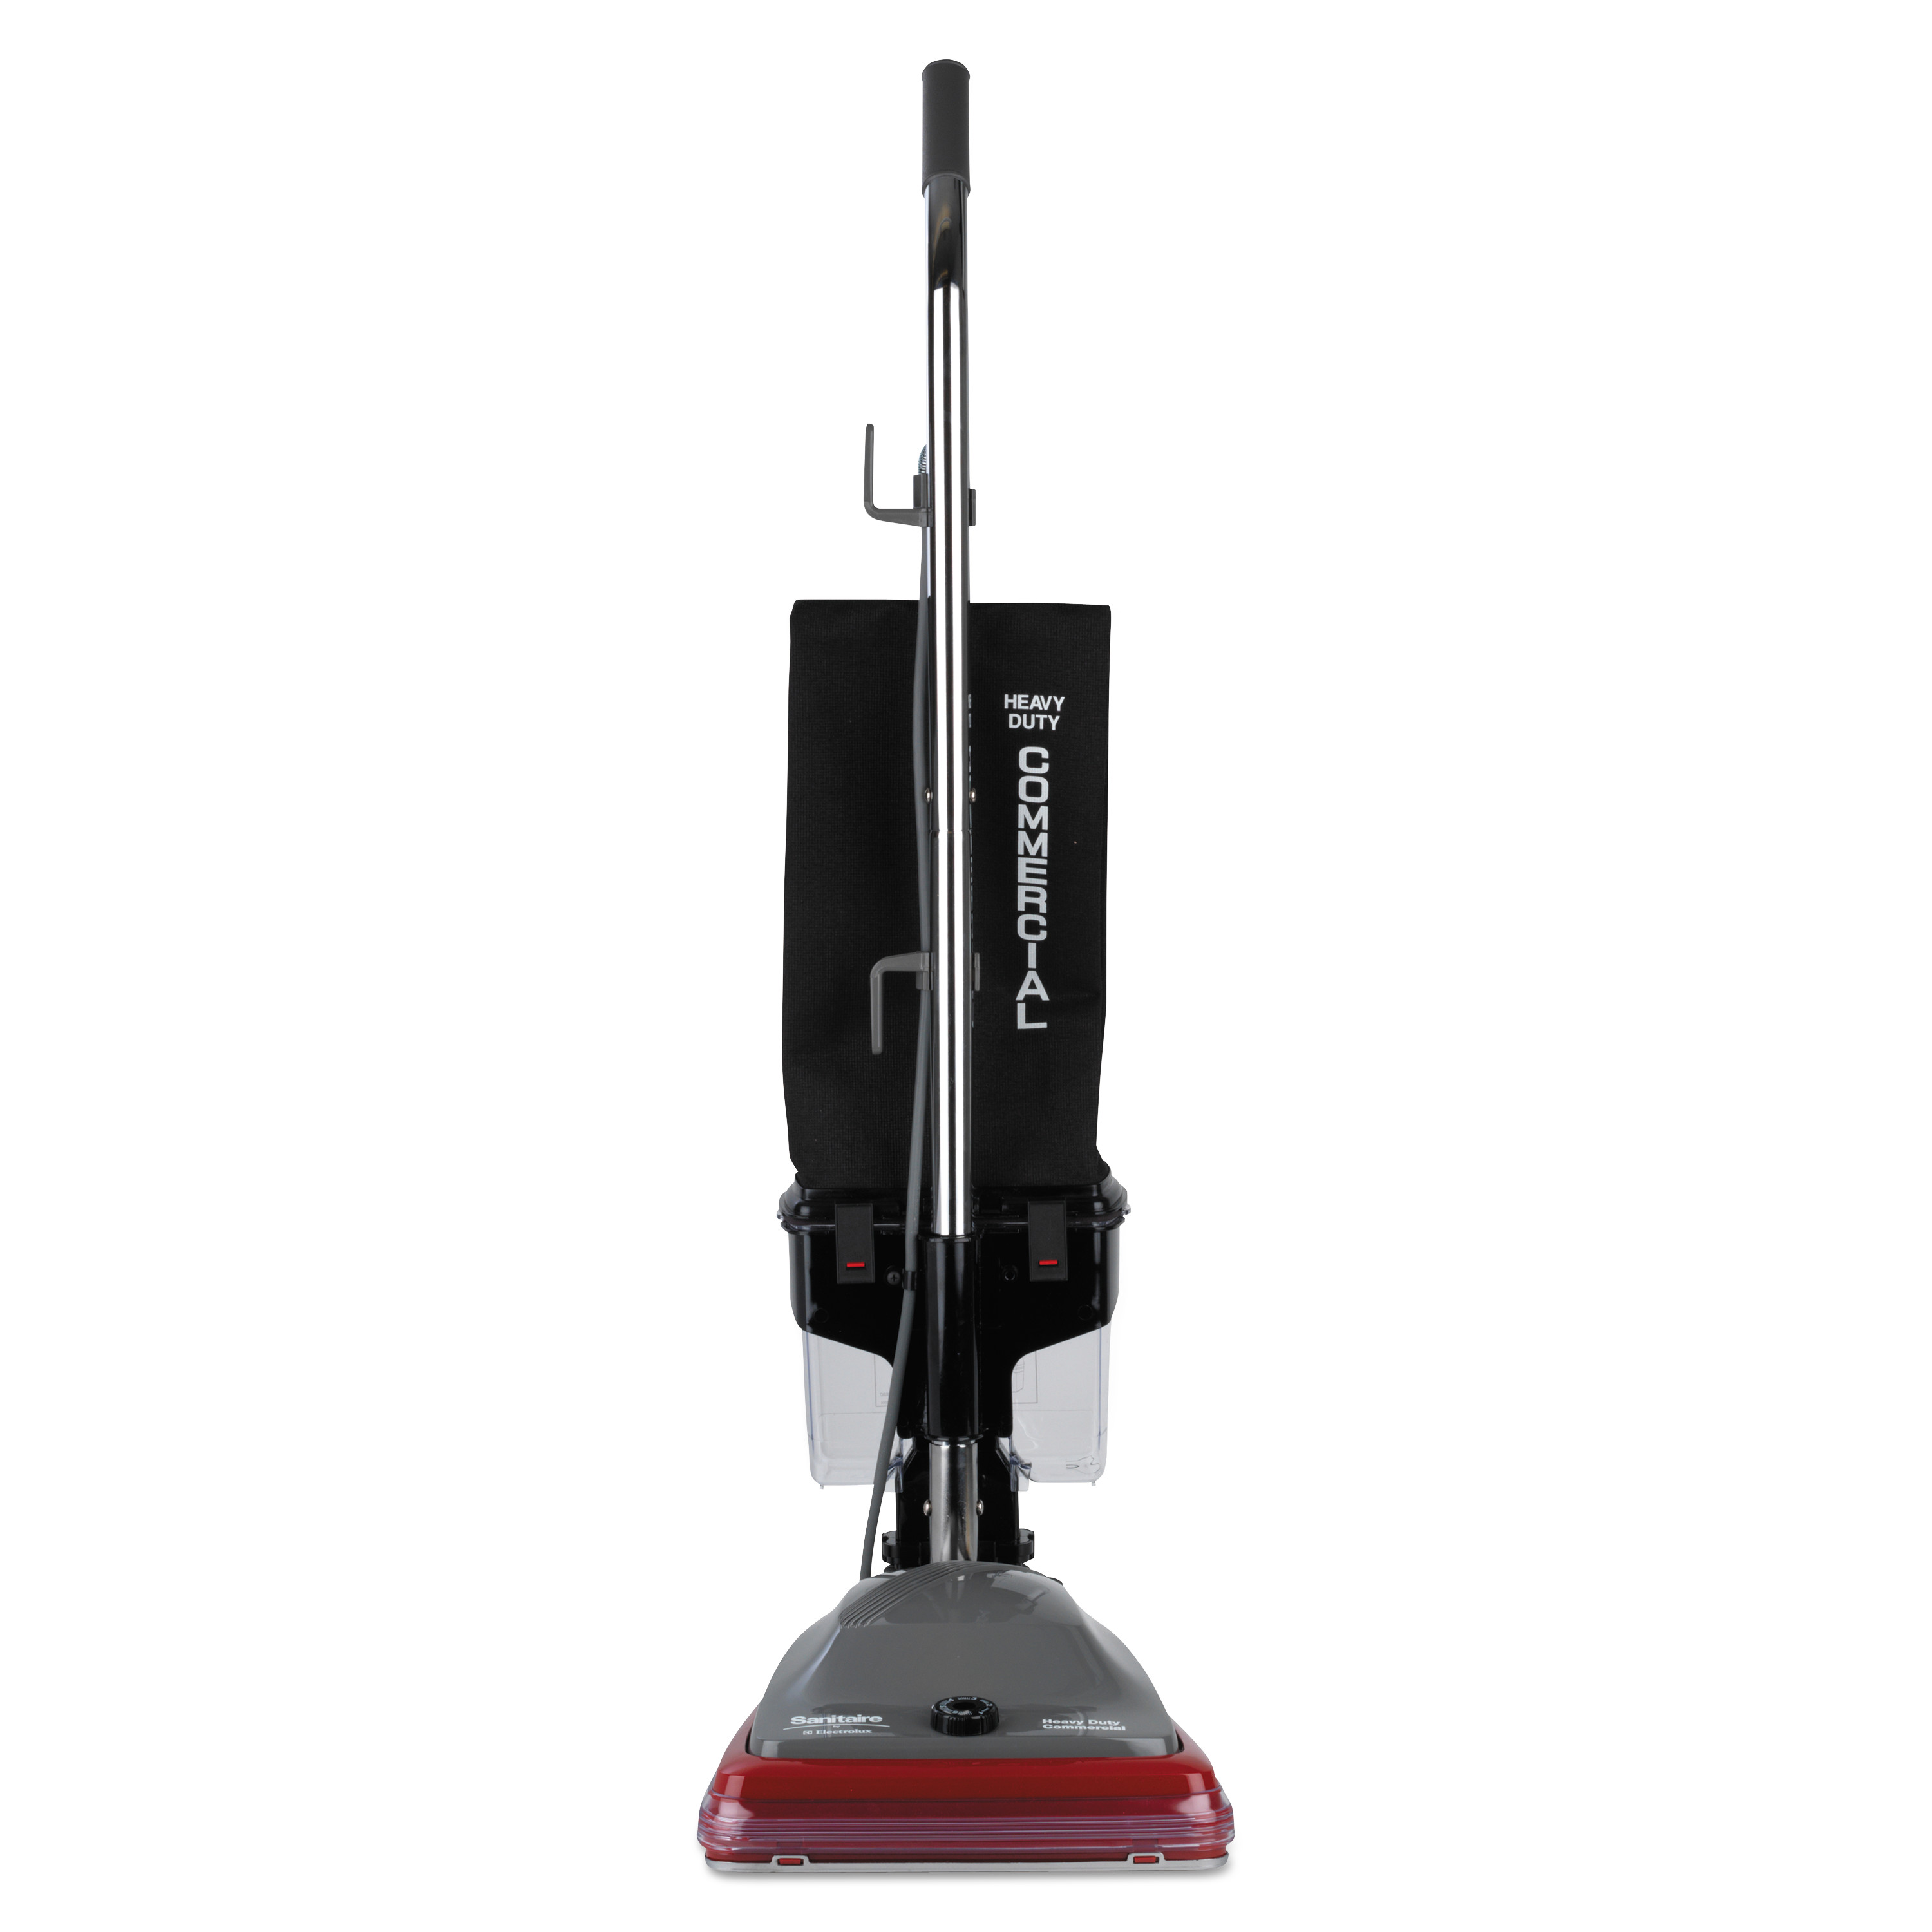  Sanitaire SC689B TRADITION Upright Vacuum with Dust Cup, 5 amp, 14 lb, Gray/Red (EURSC689) 